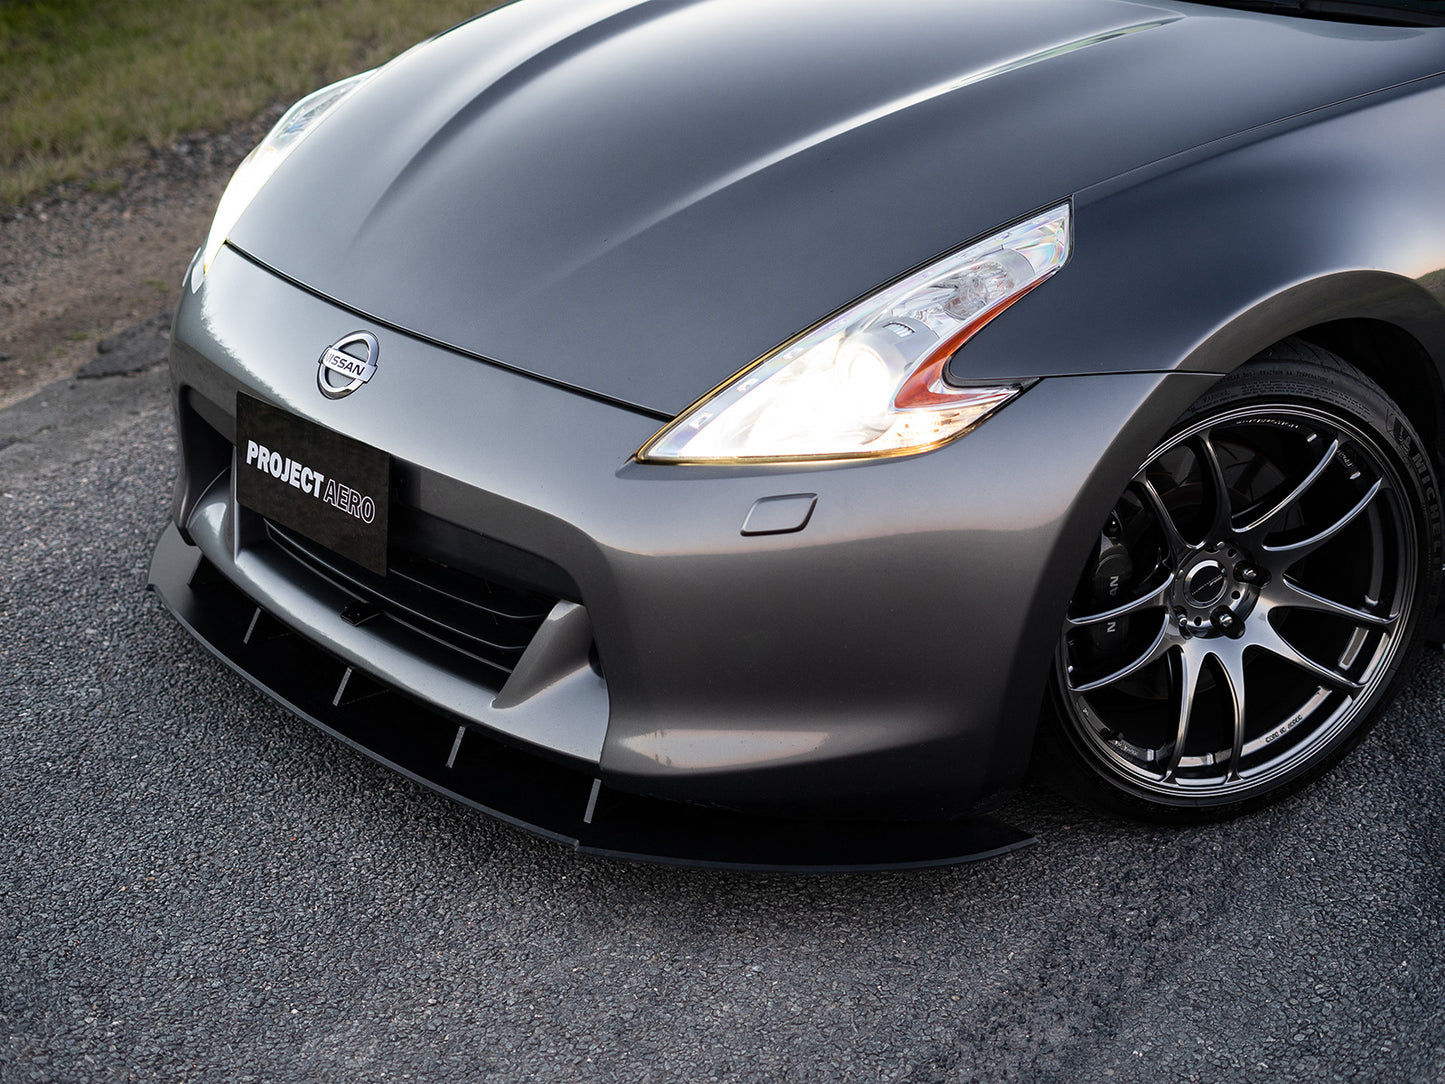 Project Aero Nissan 370z front splitter lip brings the 370z alive with its already menacing looks, a Project Aero 370z front splitter lip is a homage to the 370z line up